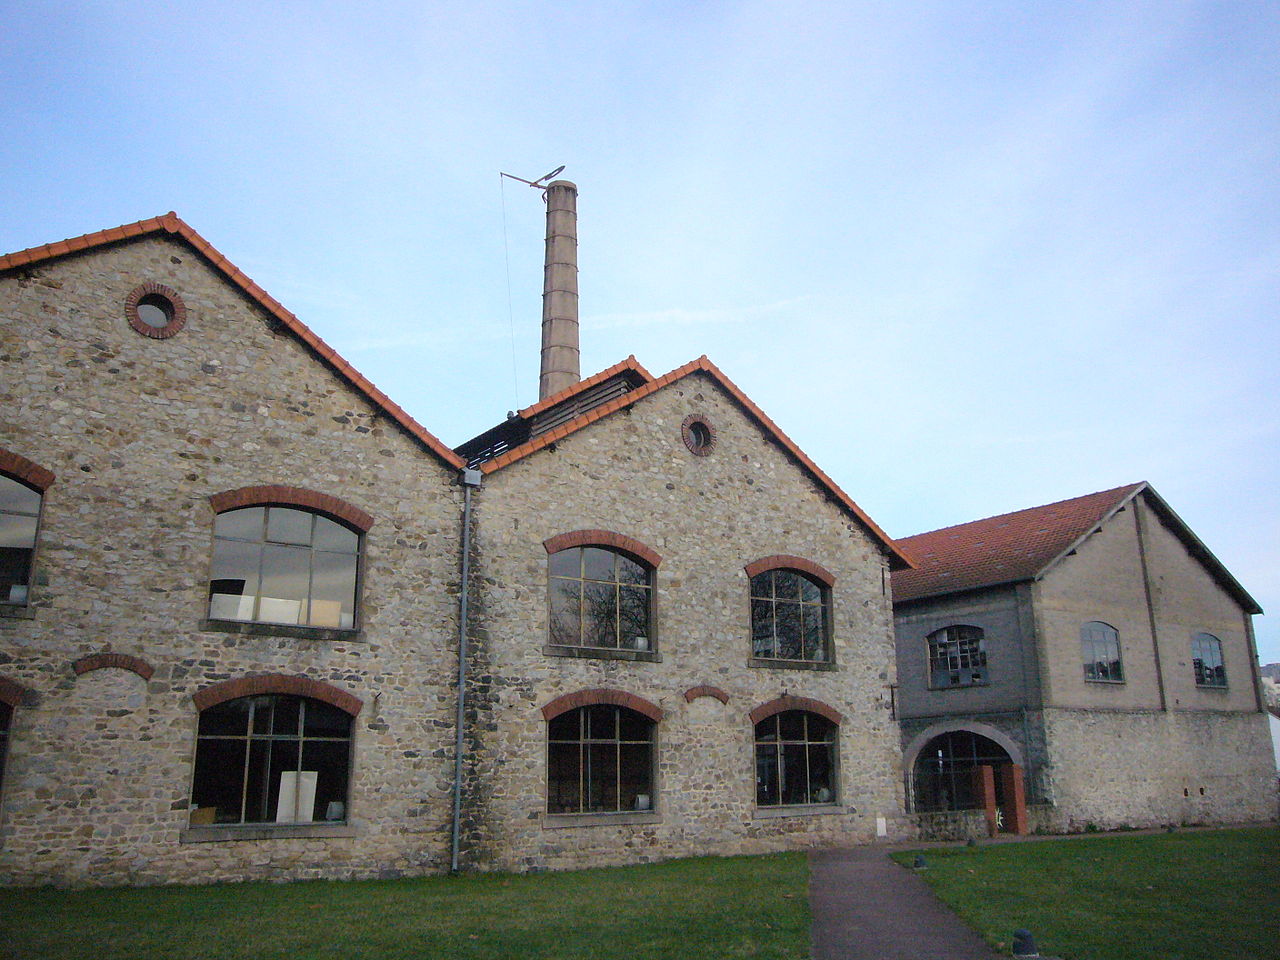 The Museum of Casseaux of Limoges